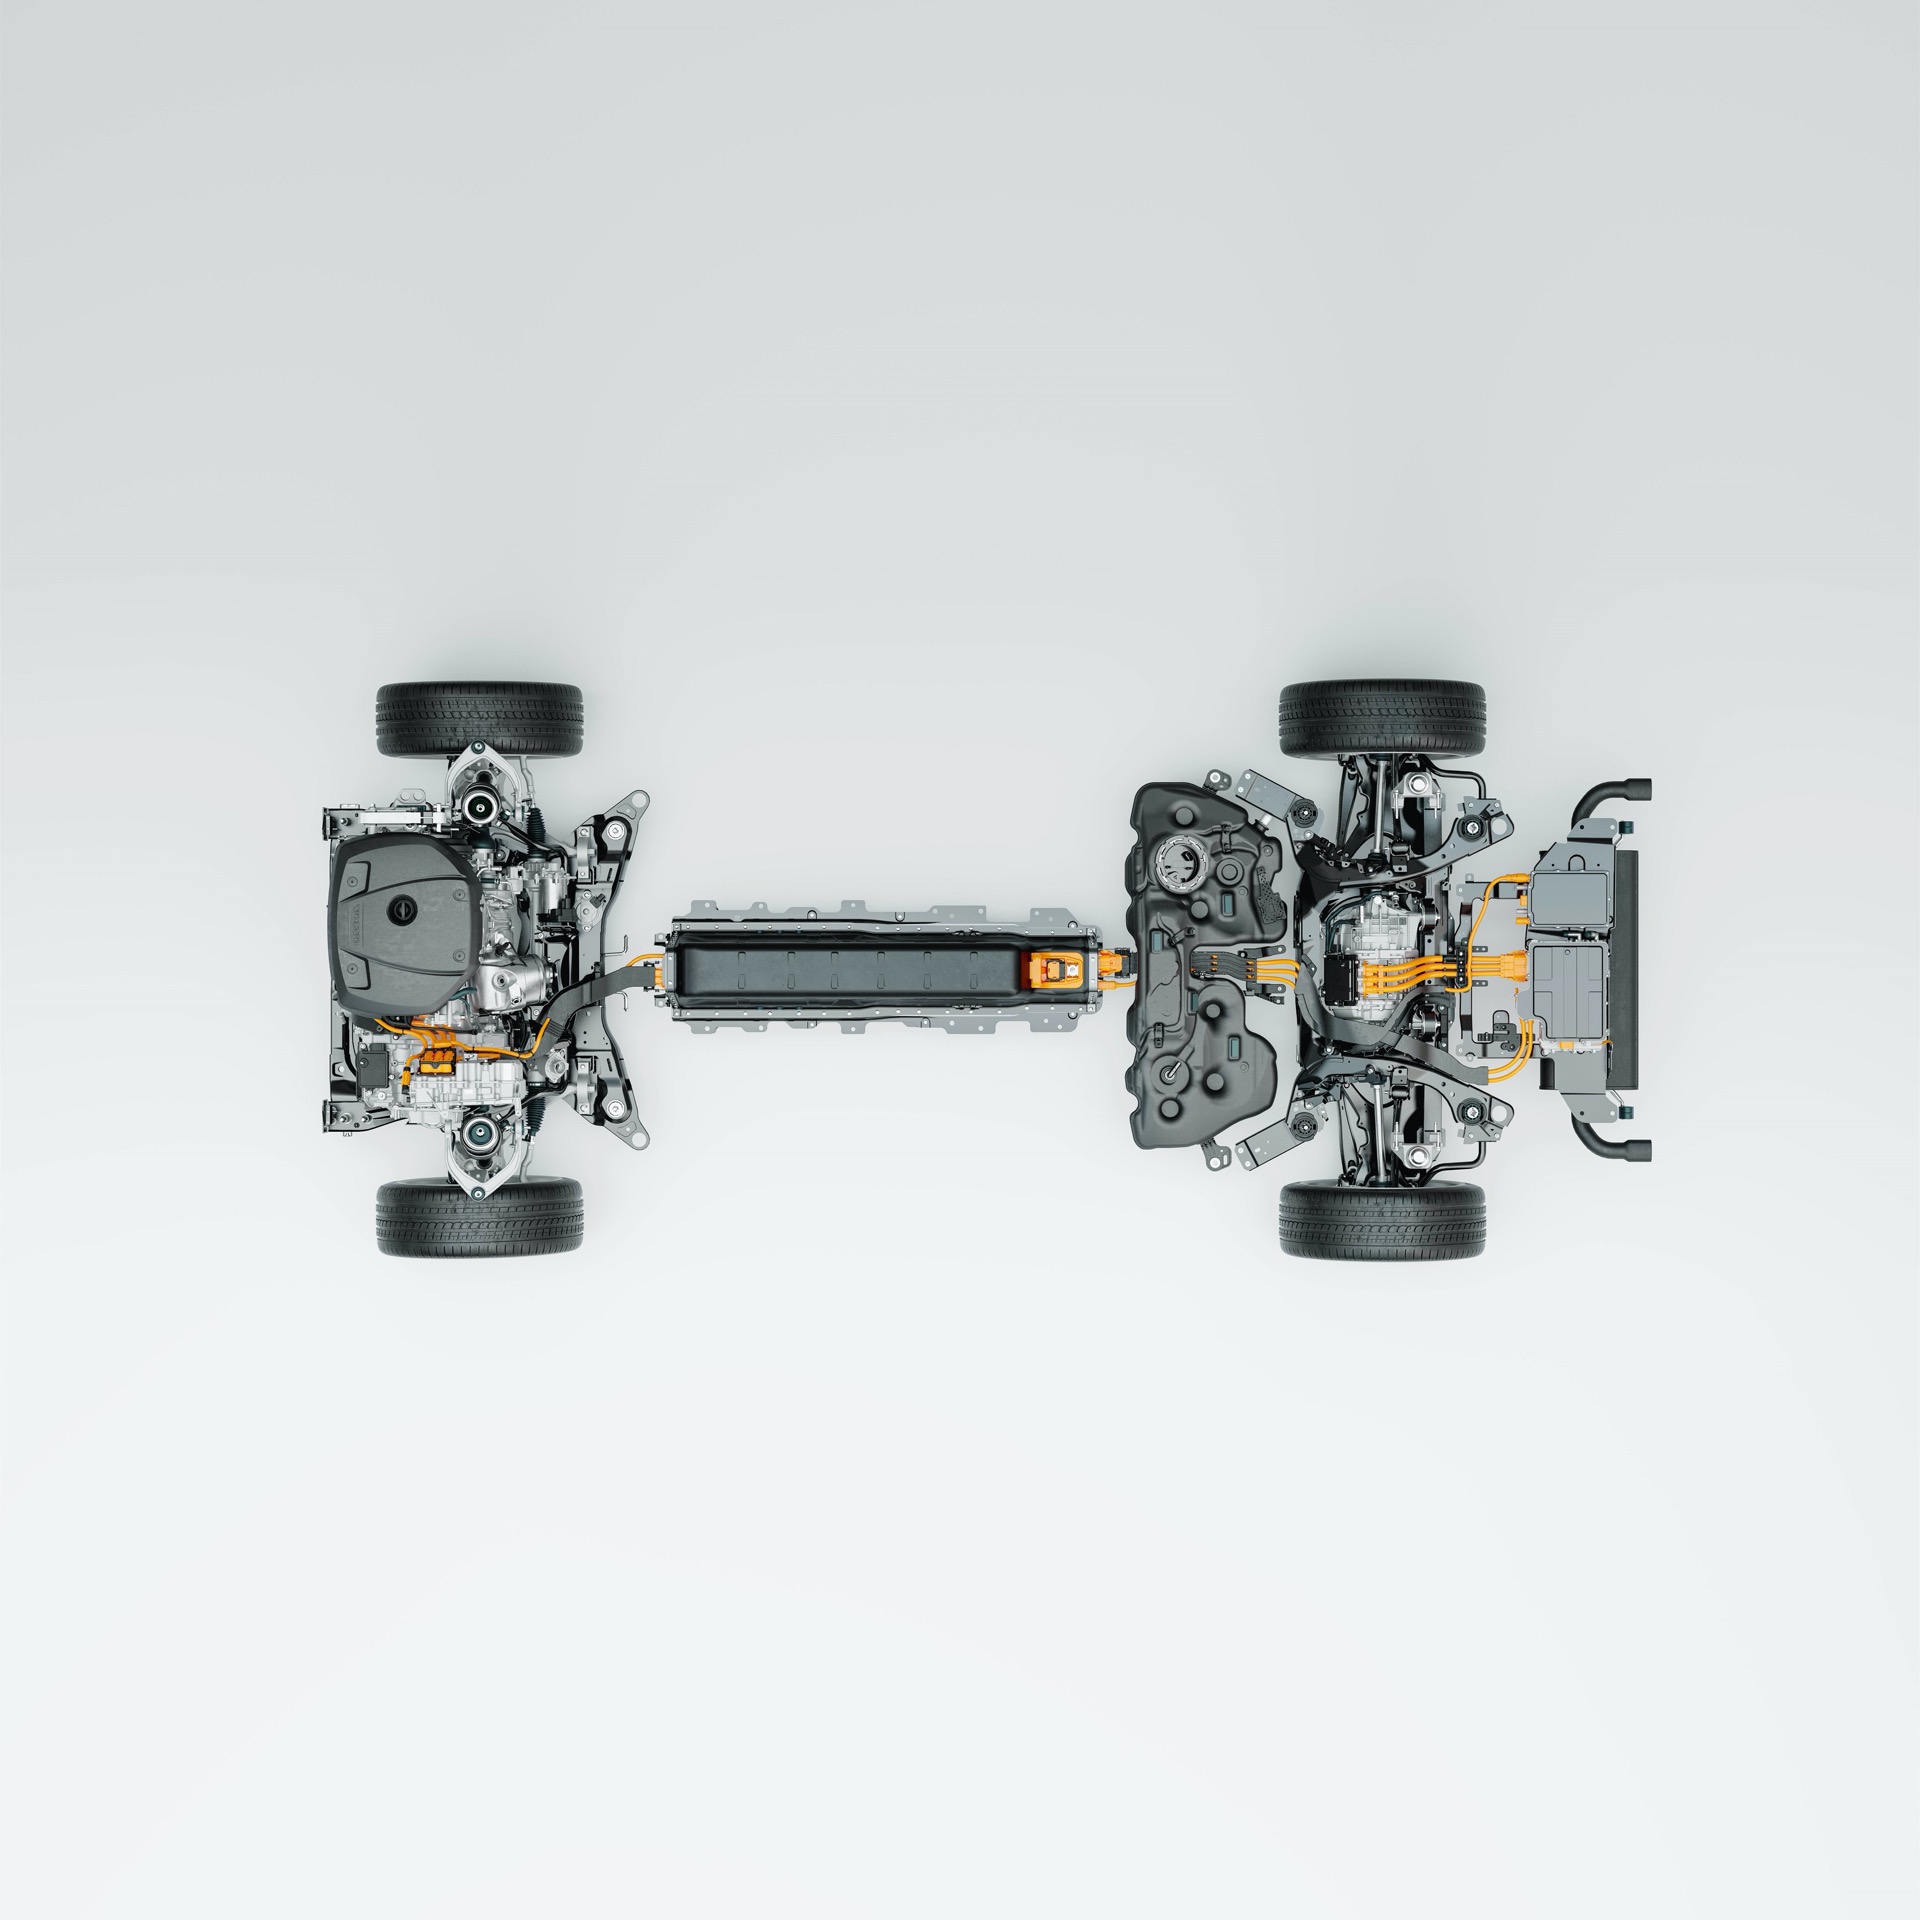 Technical Cutaway: Volvo Cars’ New Recharge Plug In Hybrid Powertrain Outperforms Average Daily Mileage On A Single Charge